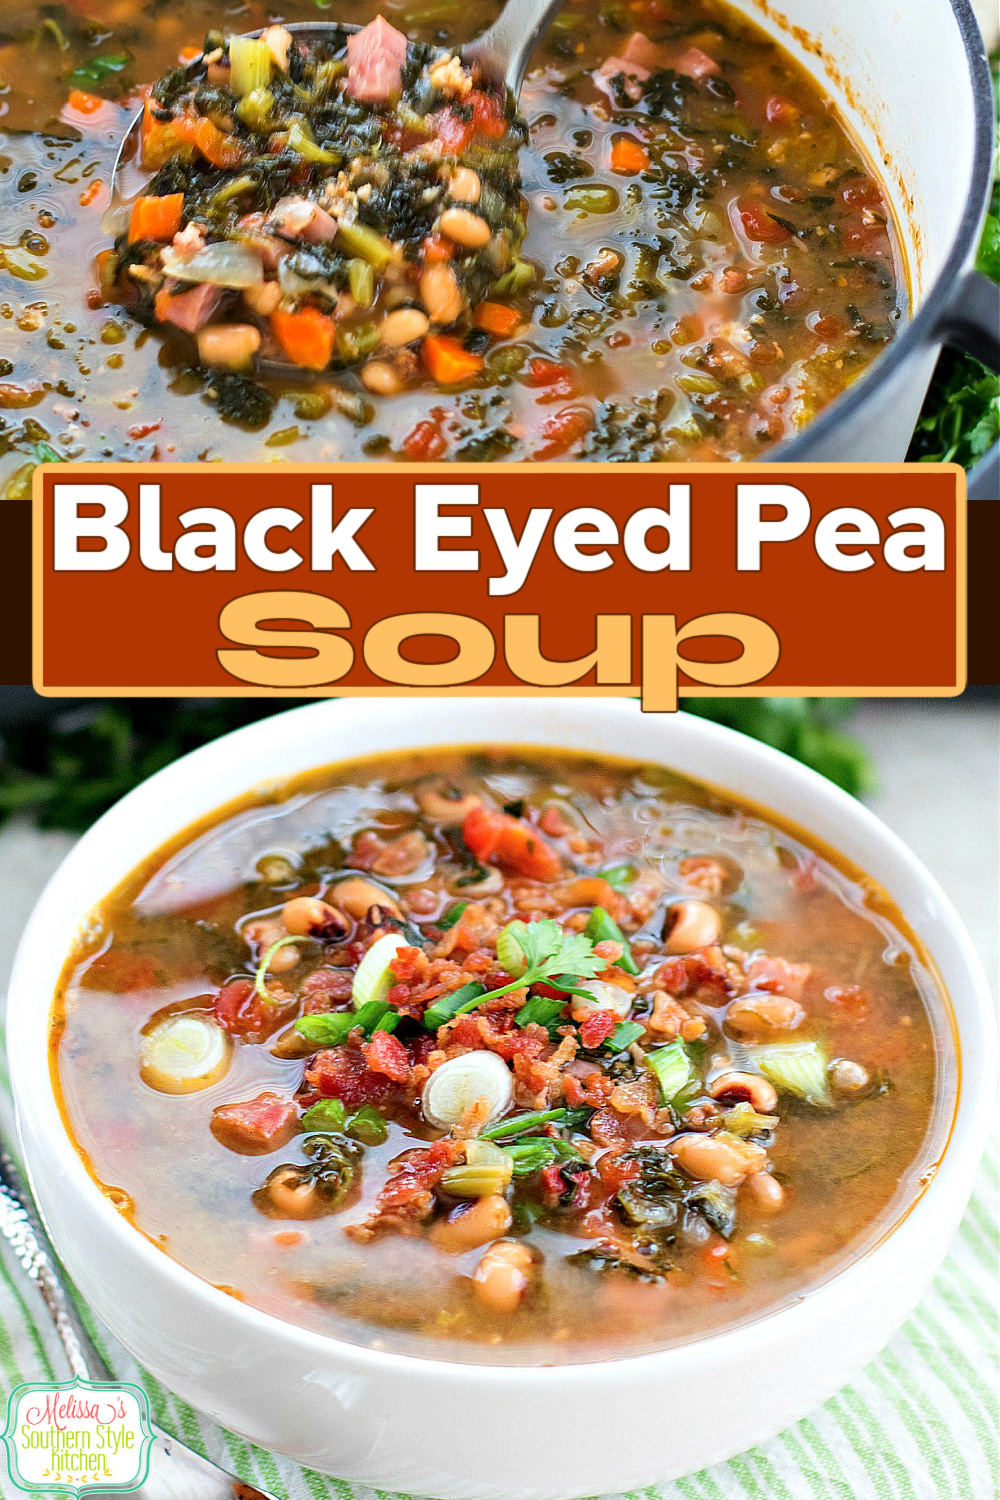 Enjoy a warm and cozy bowl of Black Eyed Pea Soup for your New Year's Day celebration #blackeyedpeas #soup #blackeyedpeasoup #souprecipes #bestsouprecipes #newyearsdayrecipes #southernfood #southernrecipes #dinner #dinnerrecipes via @melissasssk